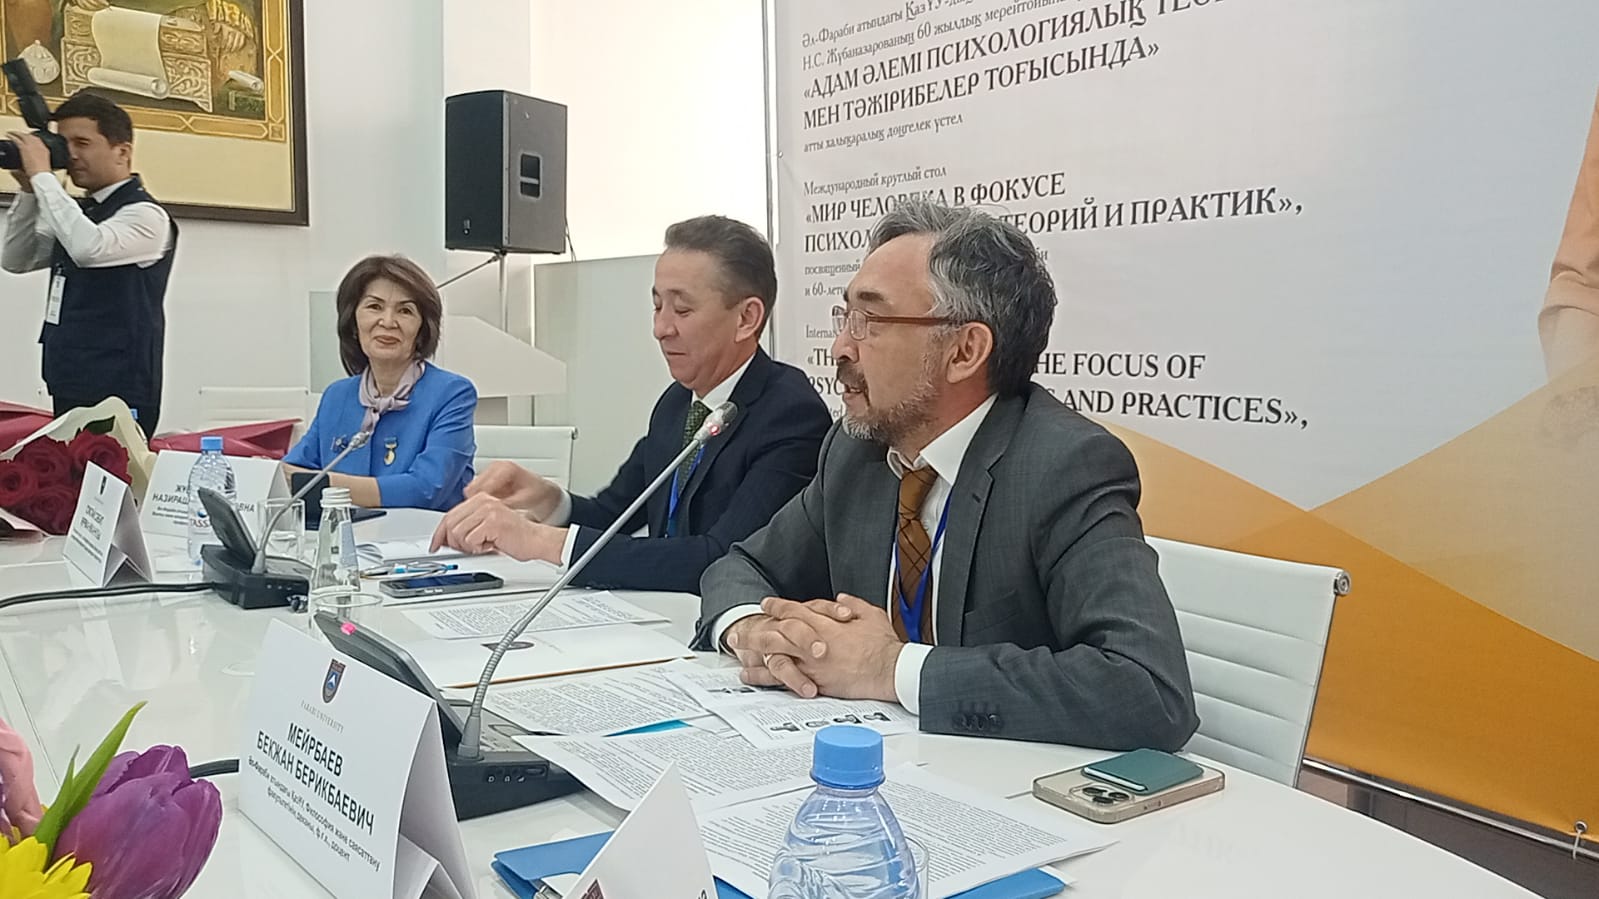 THE HUMAN WORLD IN THE FOCUS OF PSYCHOLOGICAL THEORIES AND PRACTICES: an international round table was held at Al-Farabi Kazakh National University